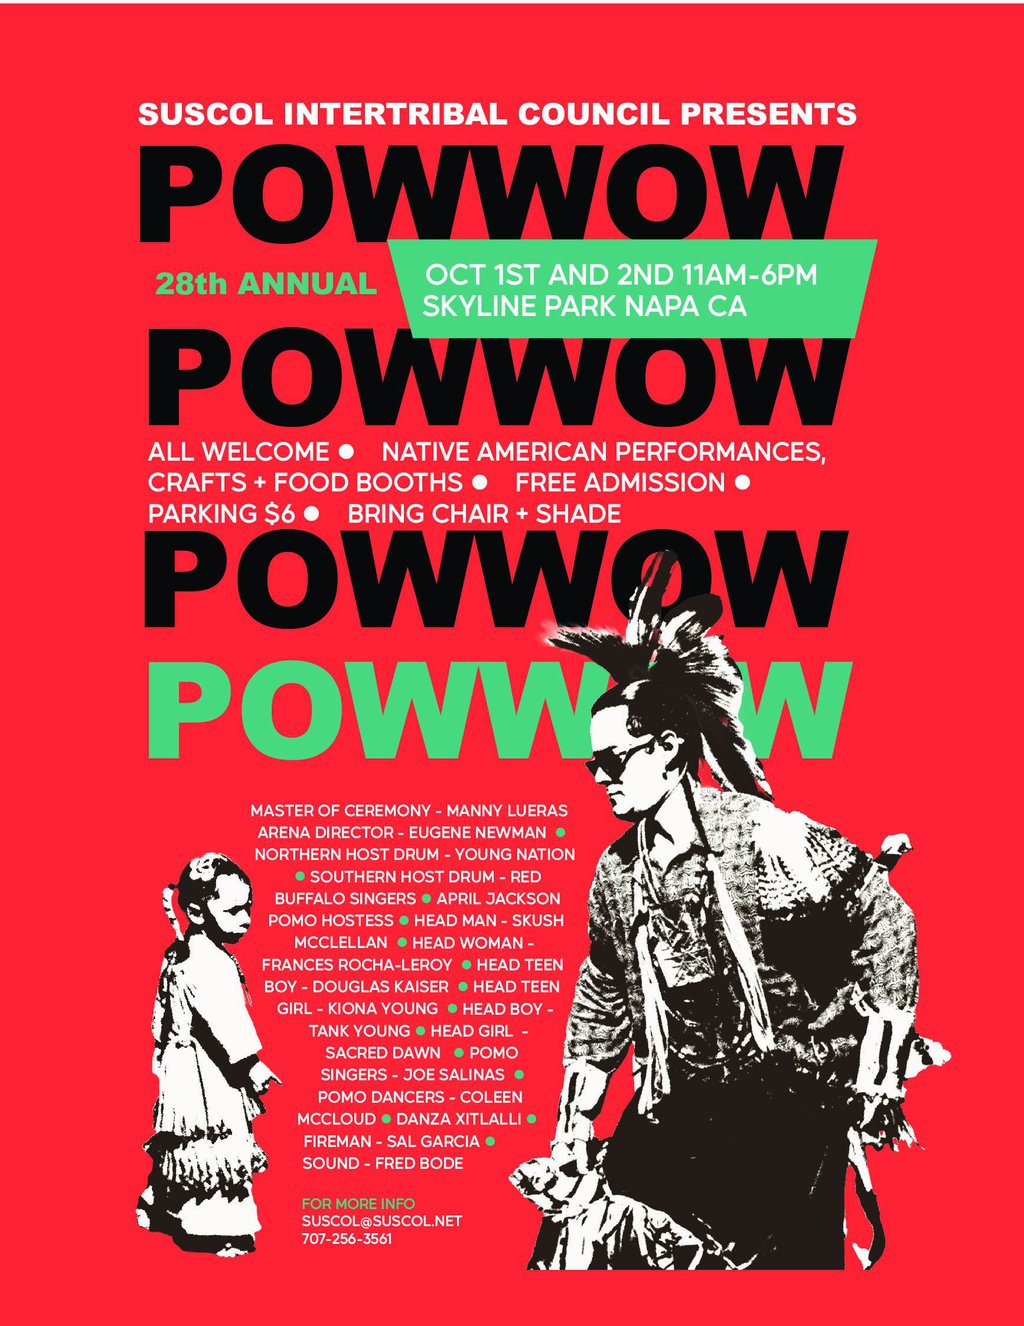 28th Annual Suscol Intertribal Pow Wow 2022